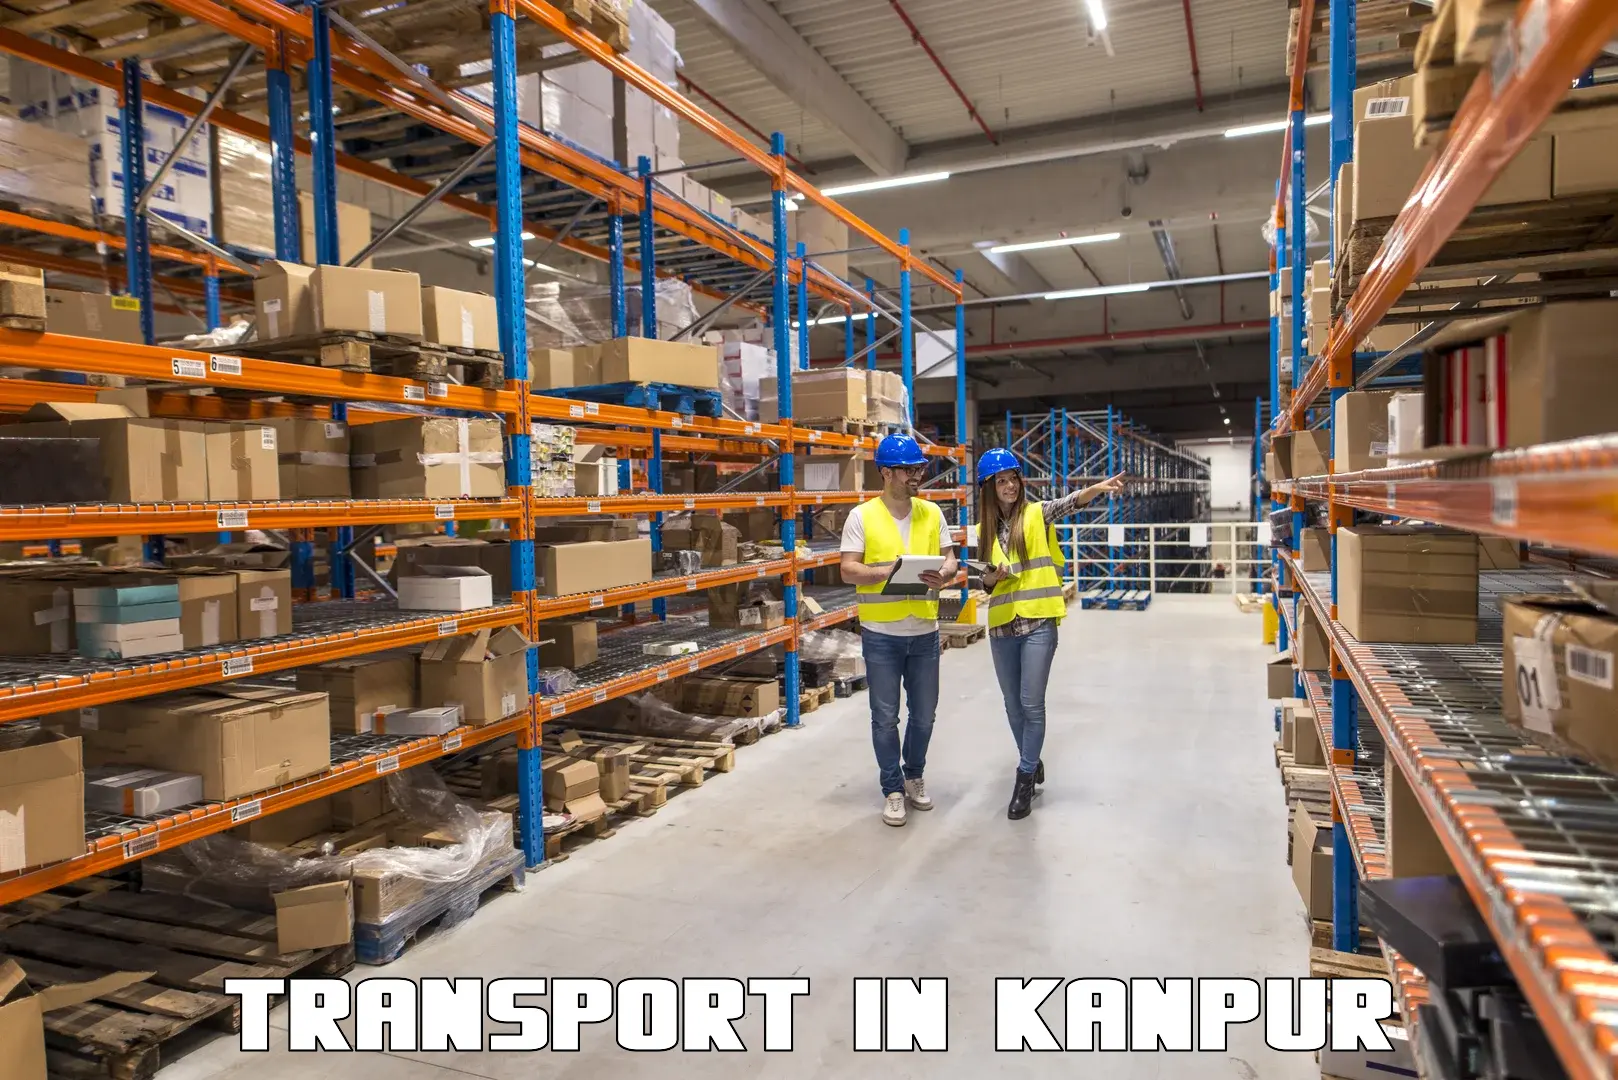 Express transport services in Kanpur